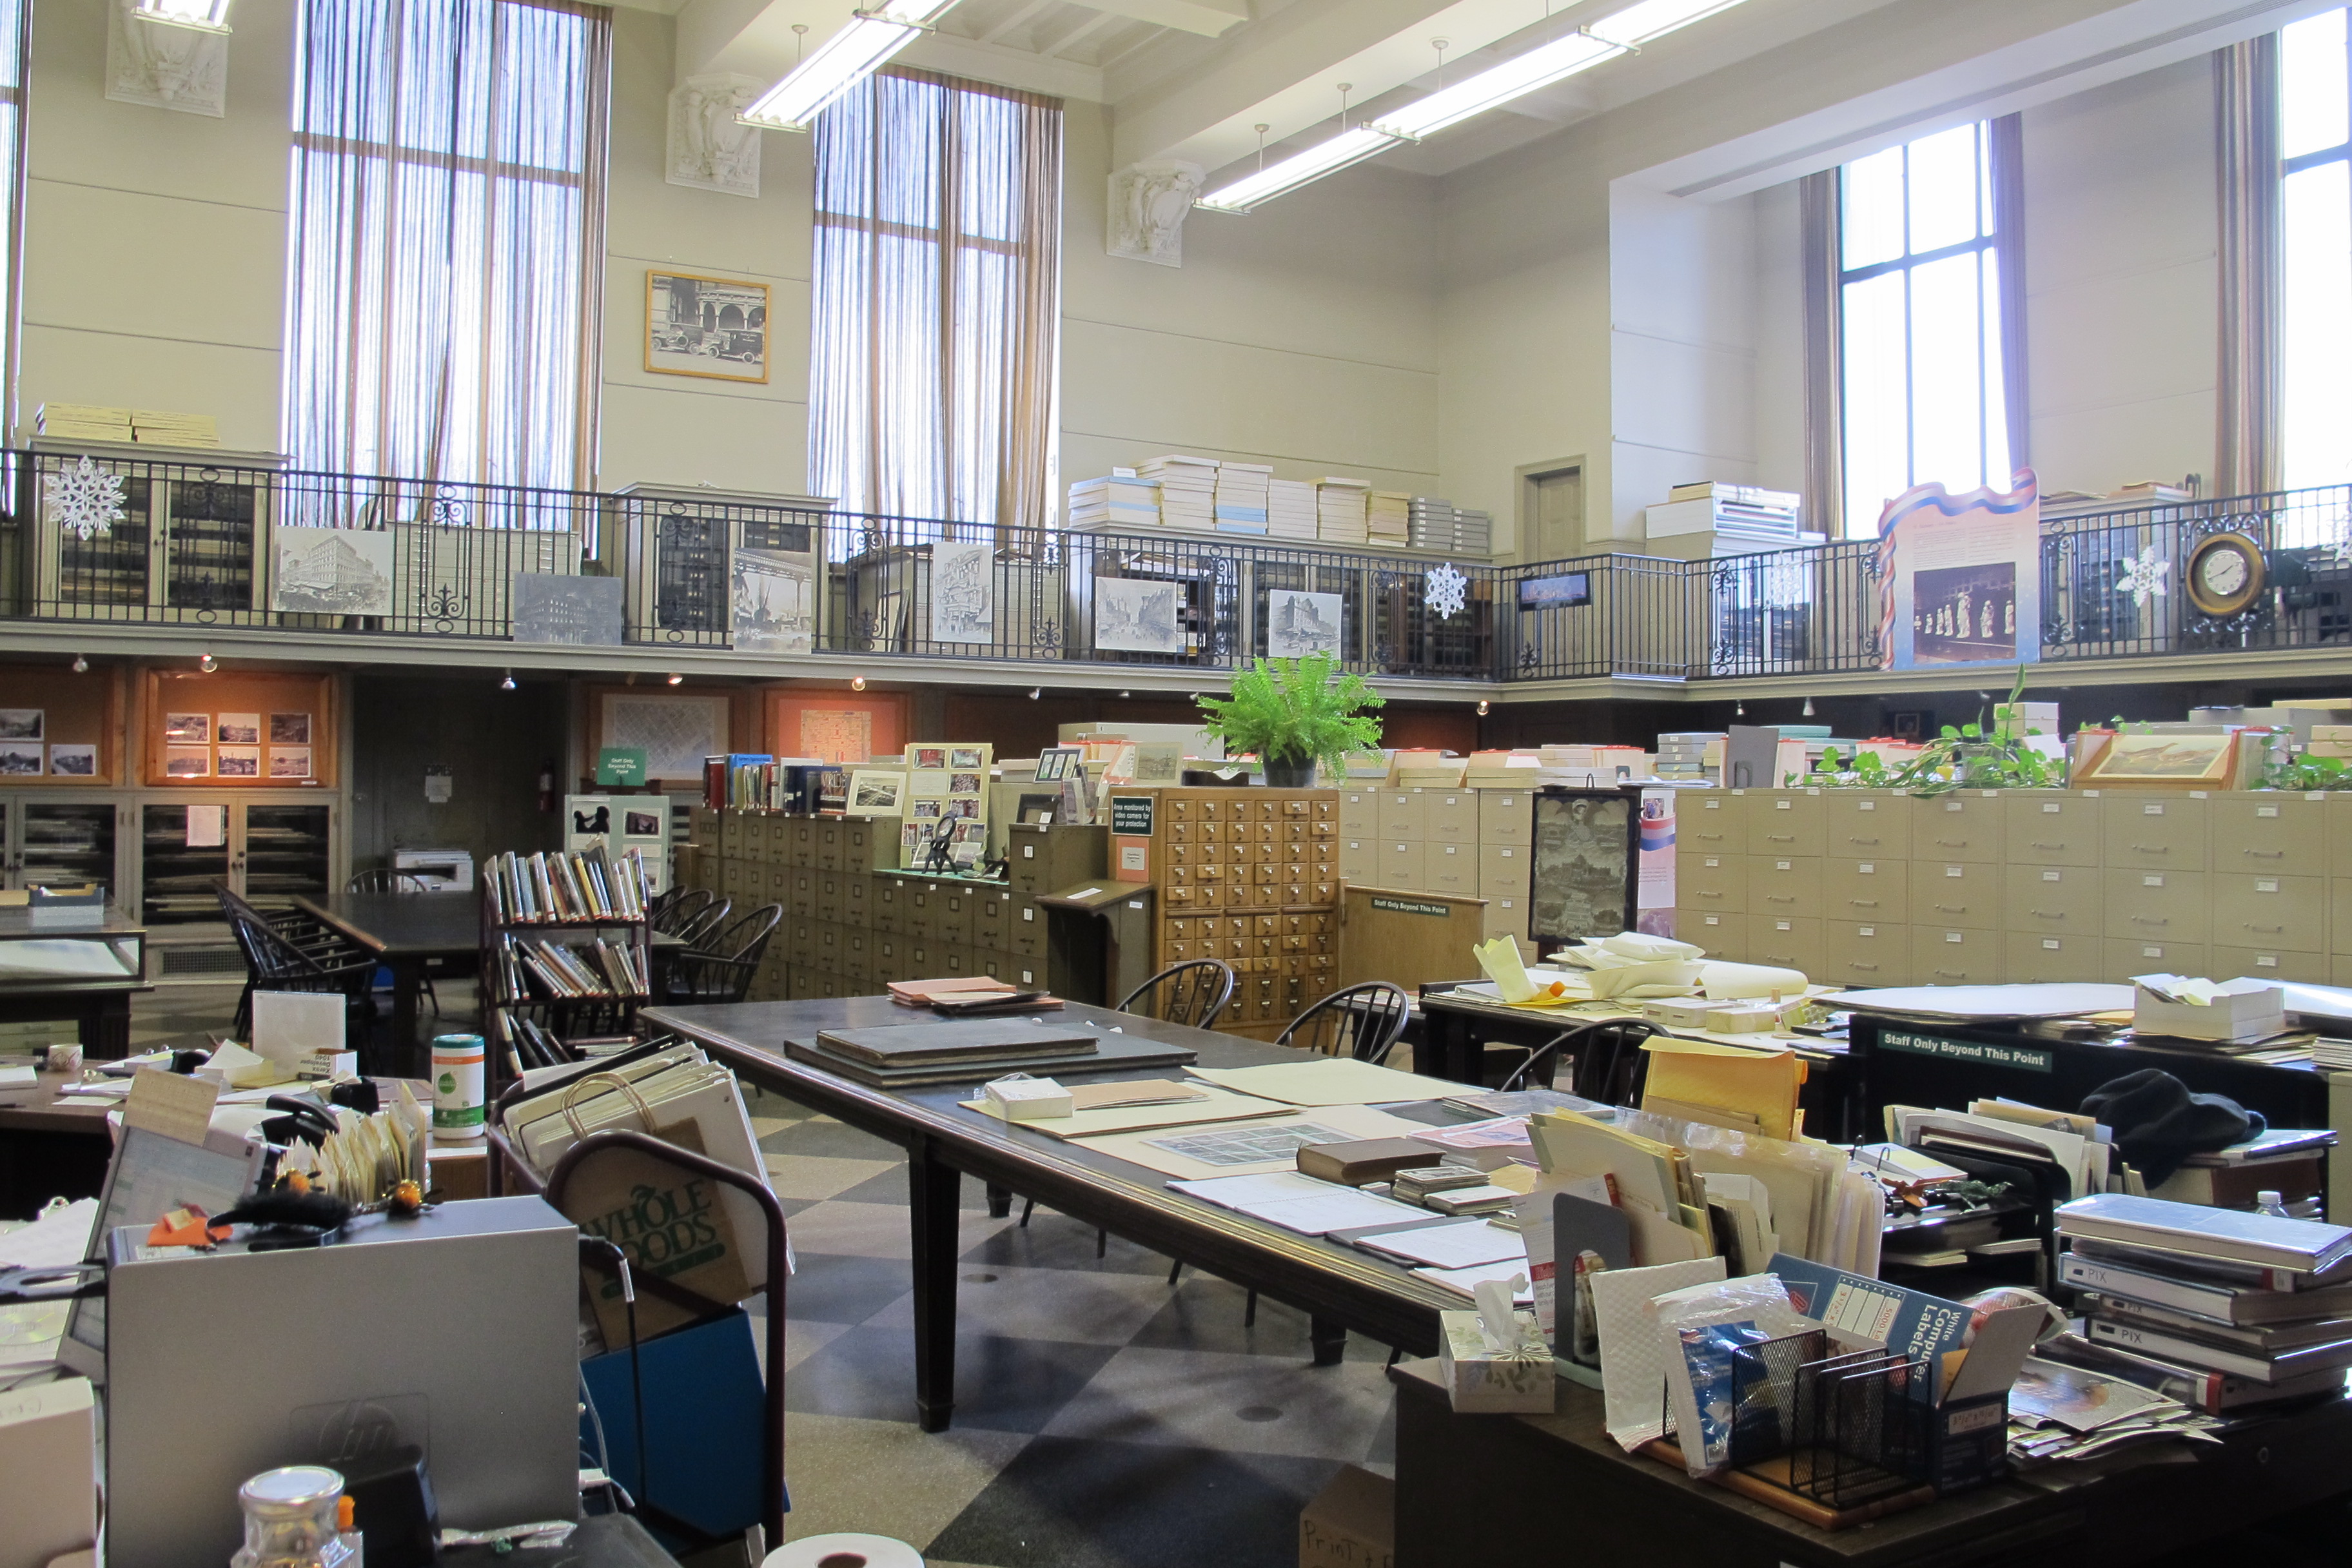 Print and Pictures holds 1.5 million items at the Free Library's Parkway Central.